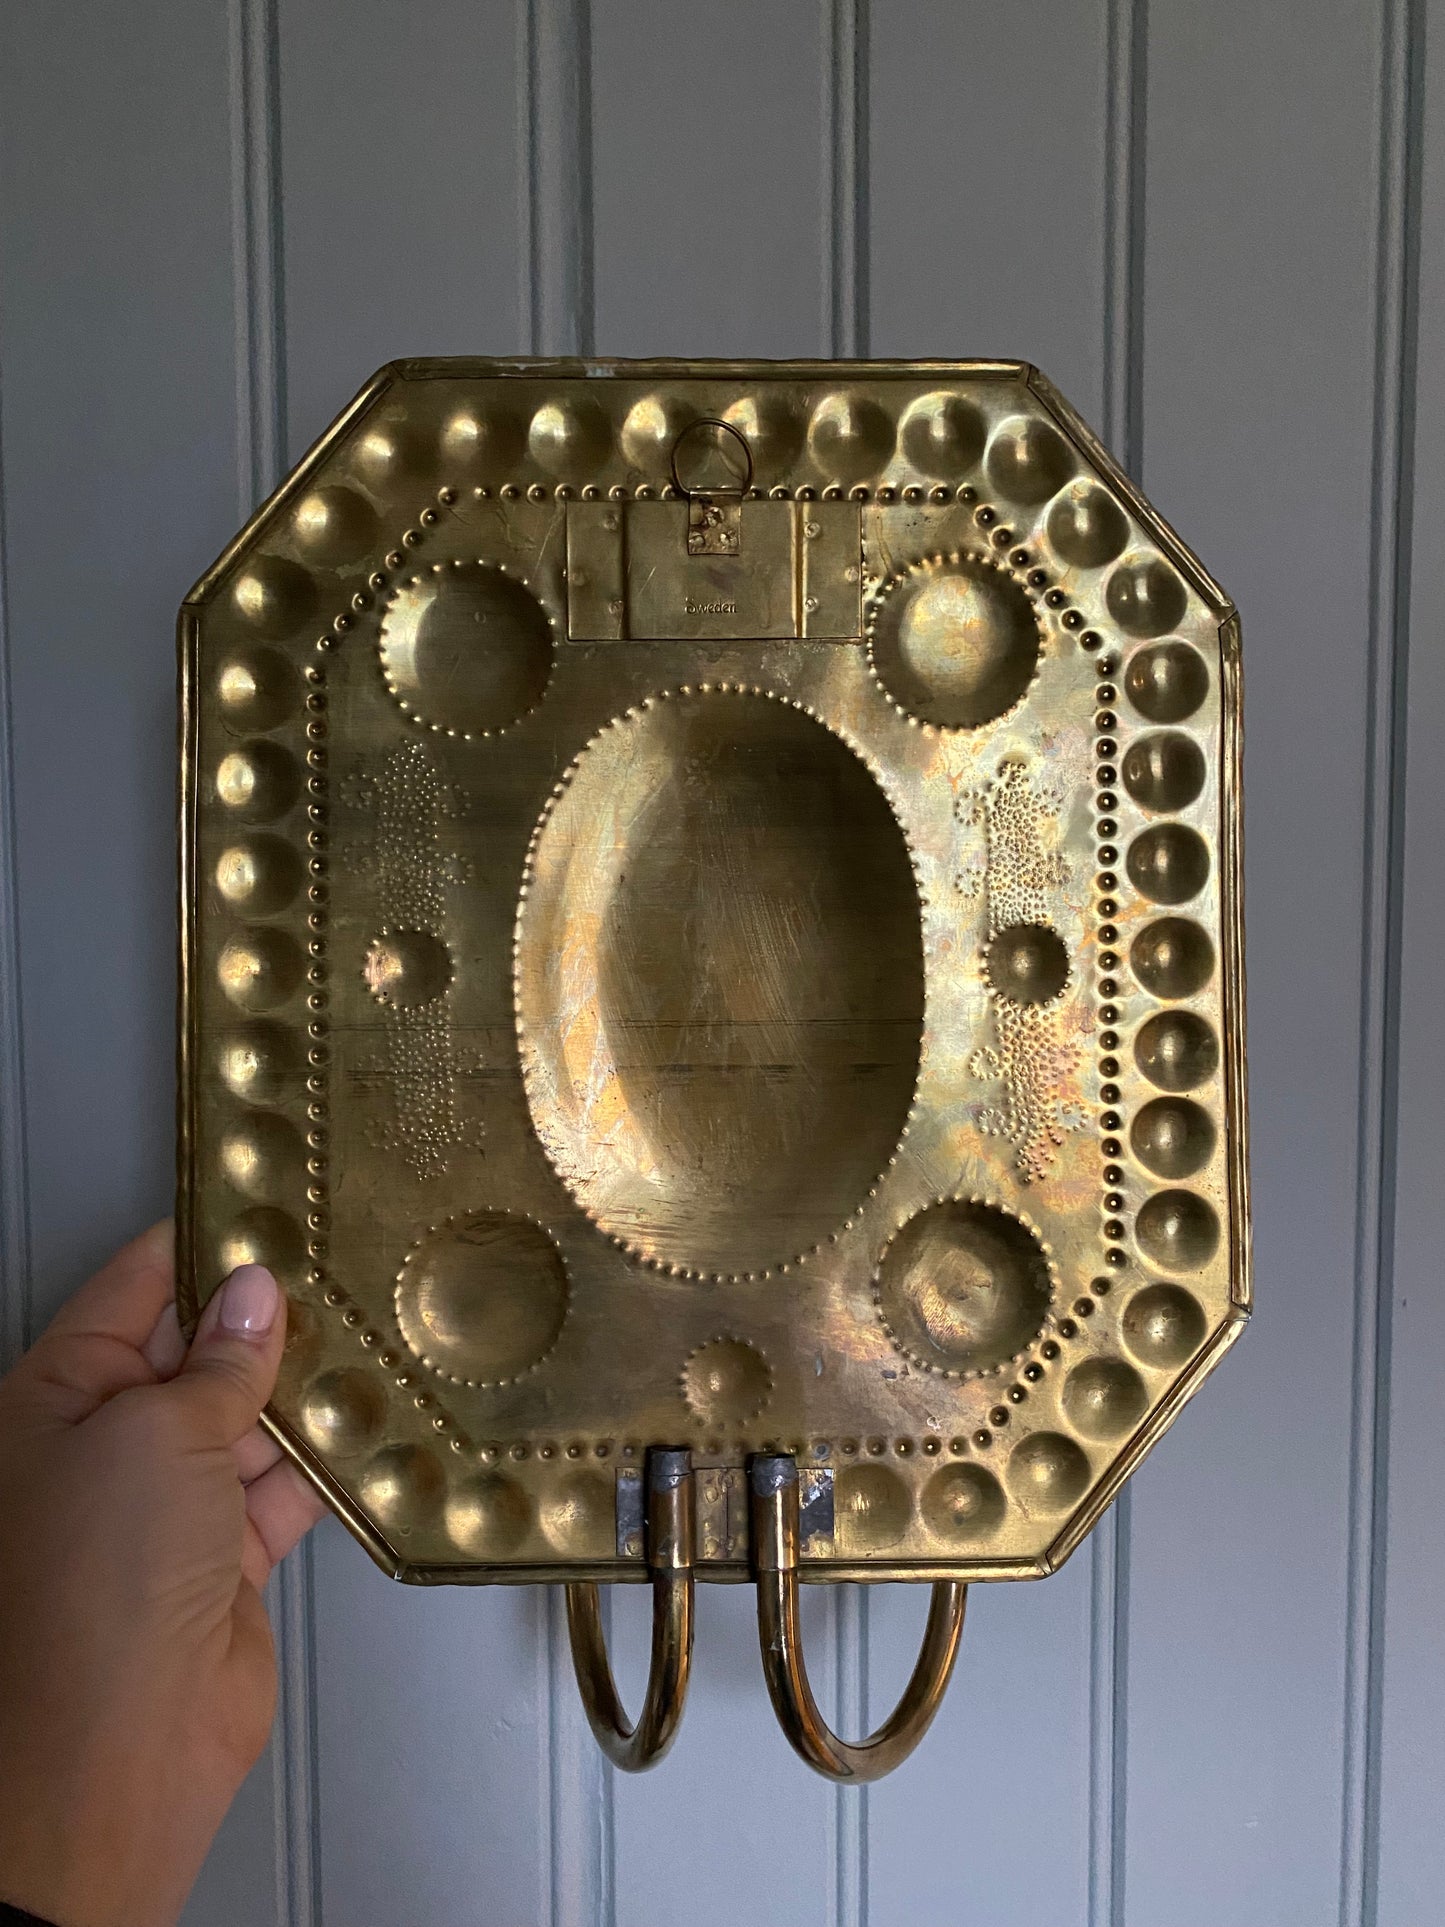 Large Brass Wall Sconce, Early 20th Century